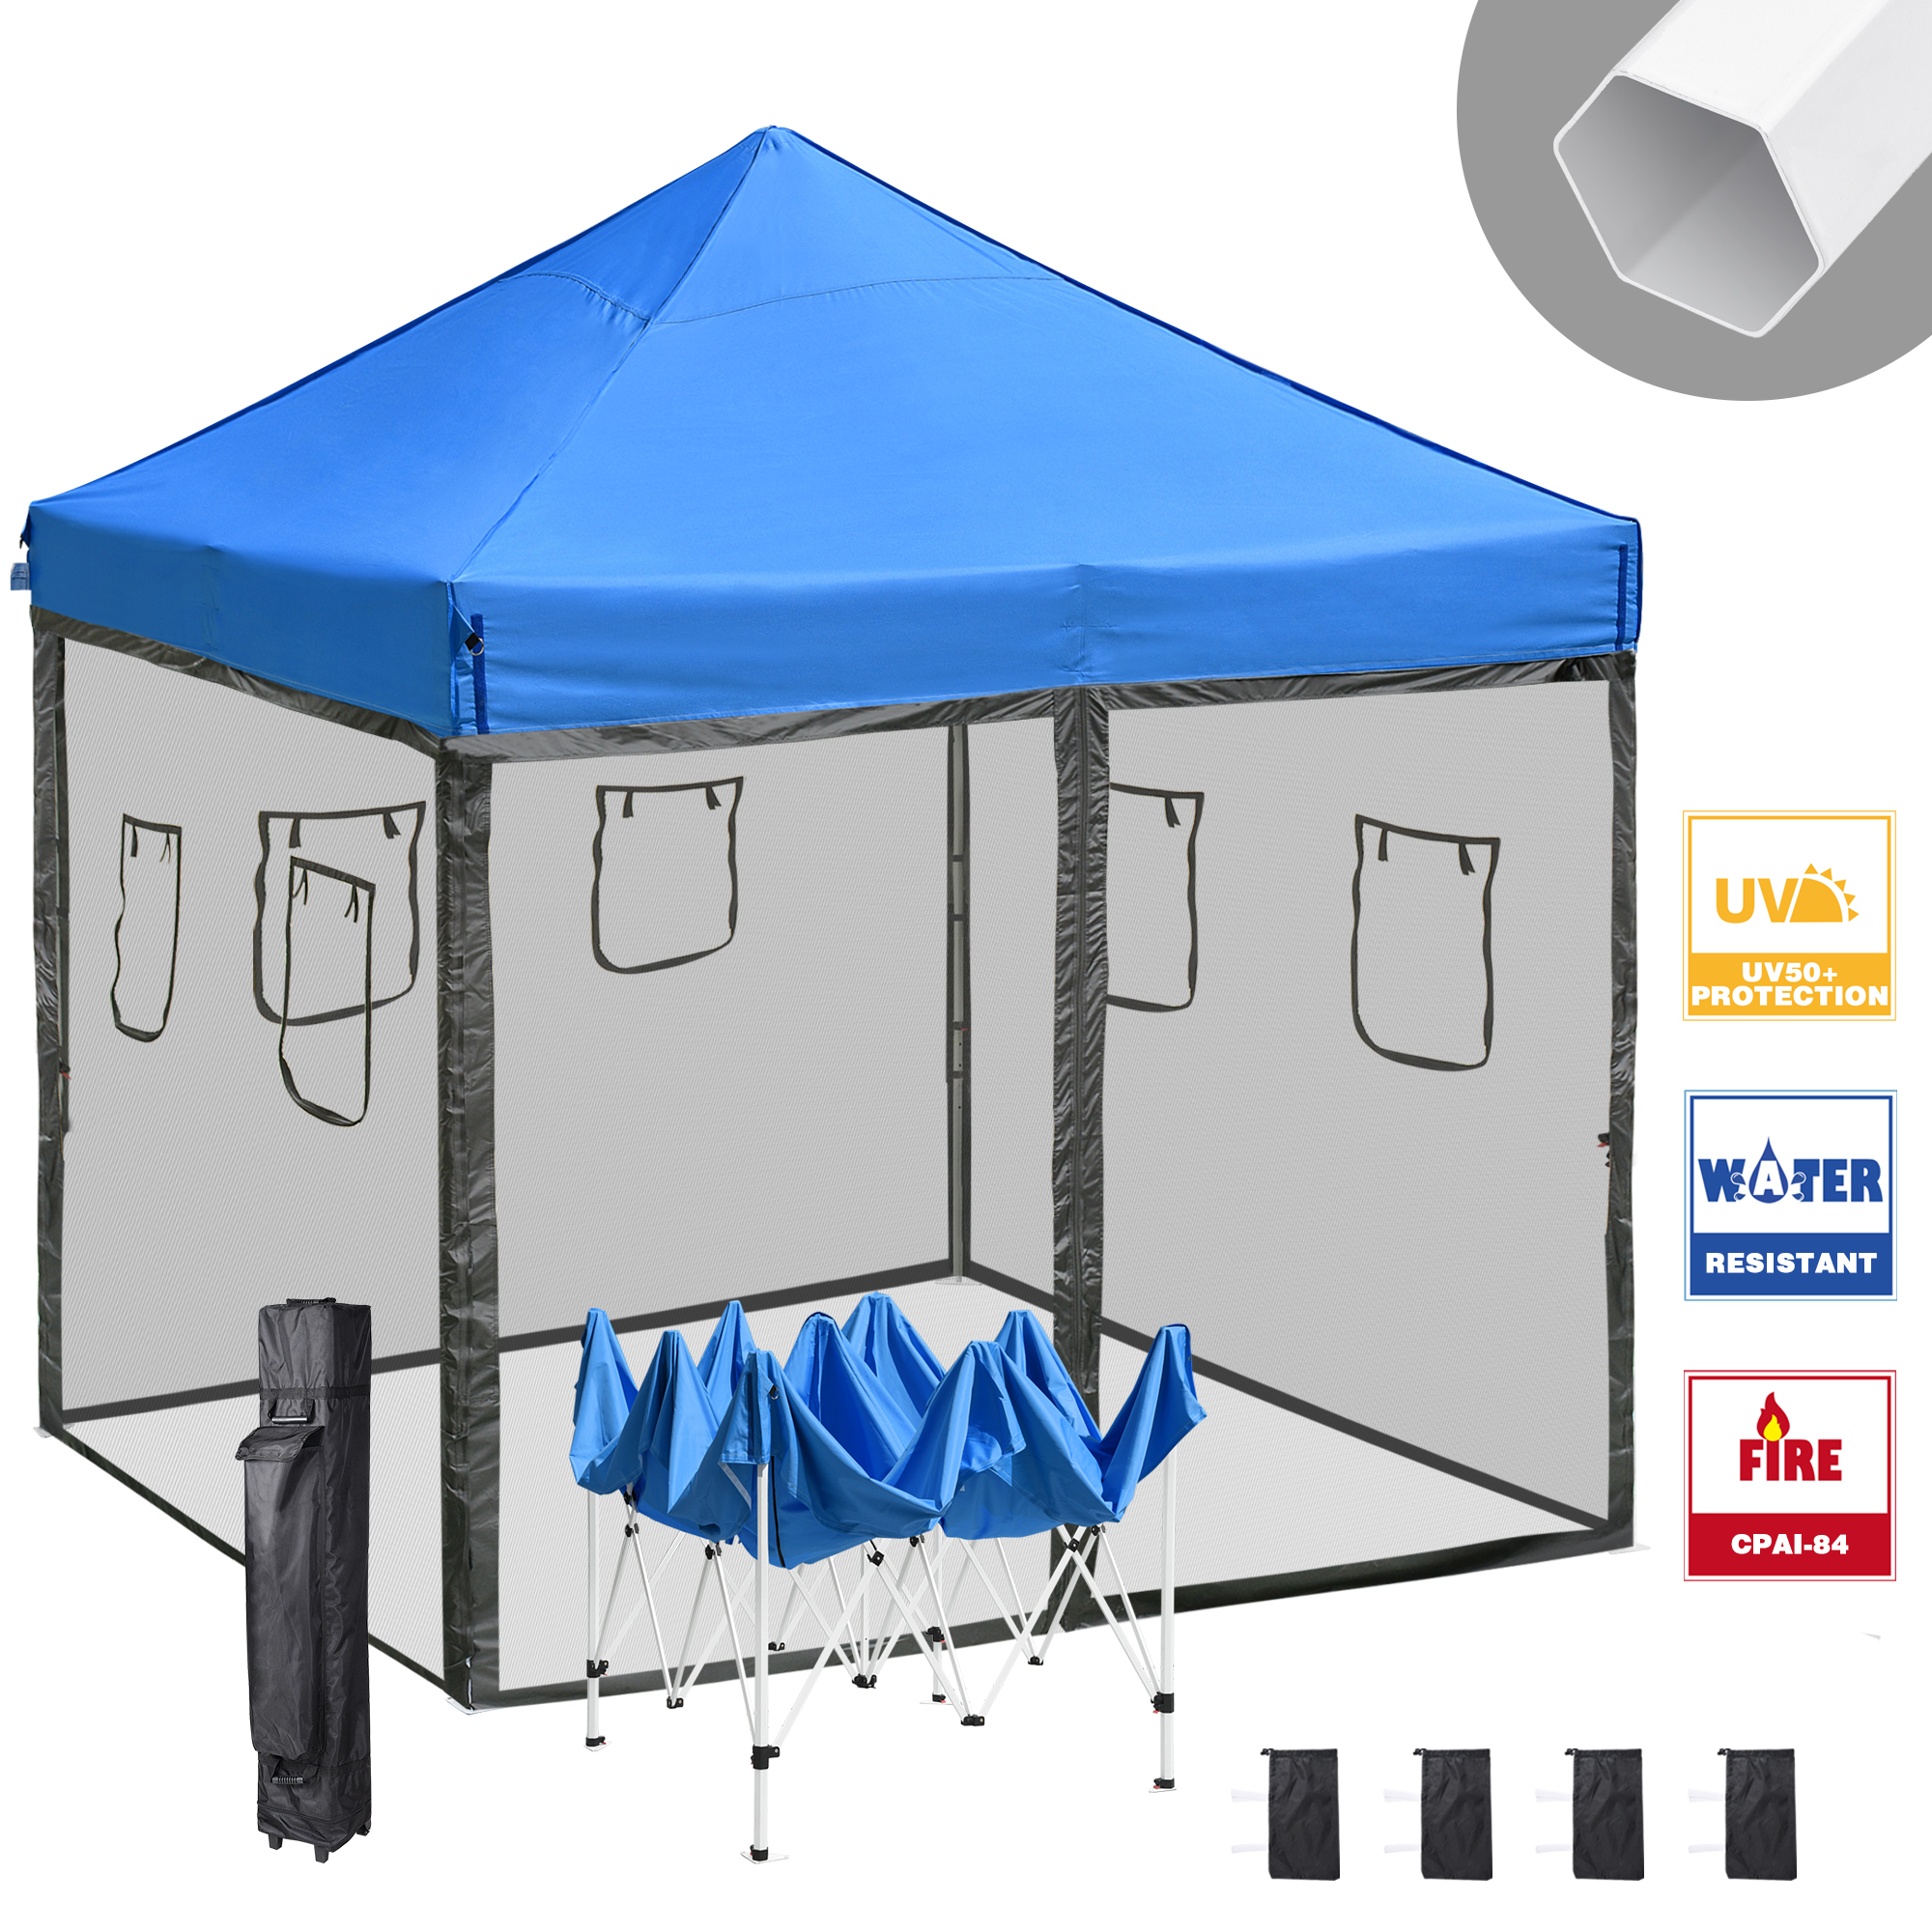 Instahibit 10x10 ft Pop Up Canopy Tent & 4 Mesh Sidewall Instant Shelter Market - image 2 of 11